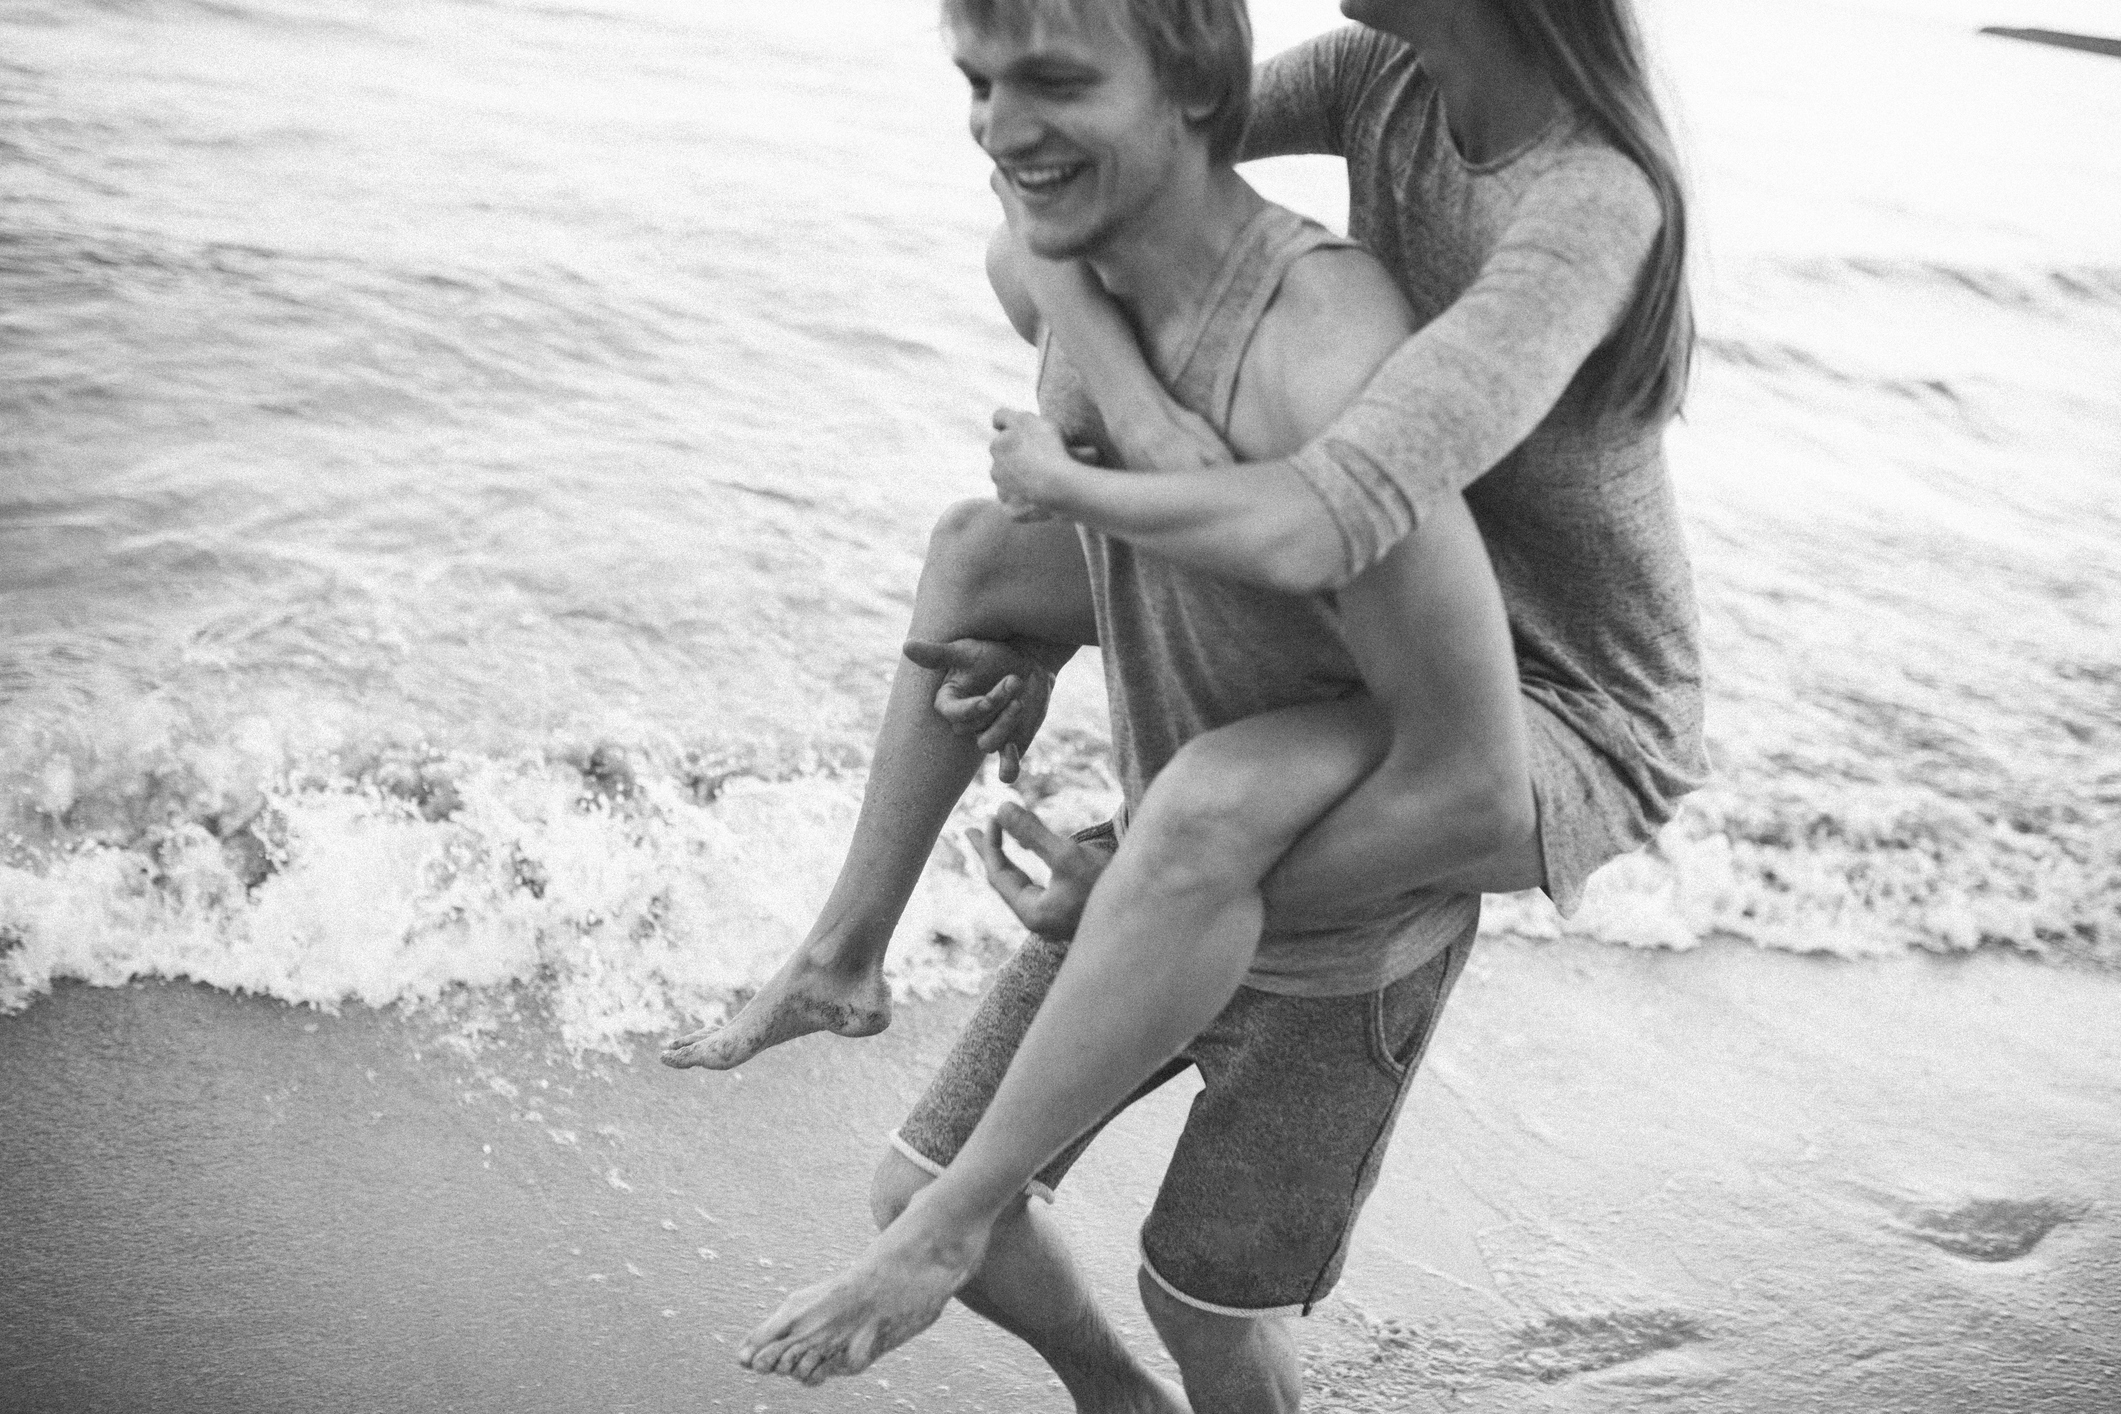 Man giving woman a piggyback ride on a beach, both smiling, waves in the background